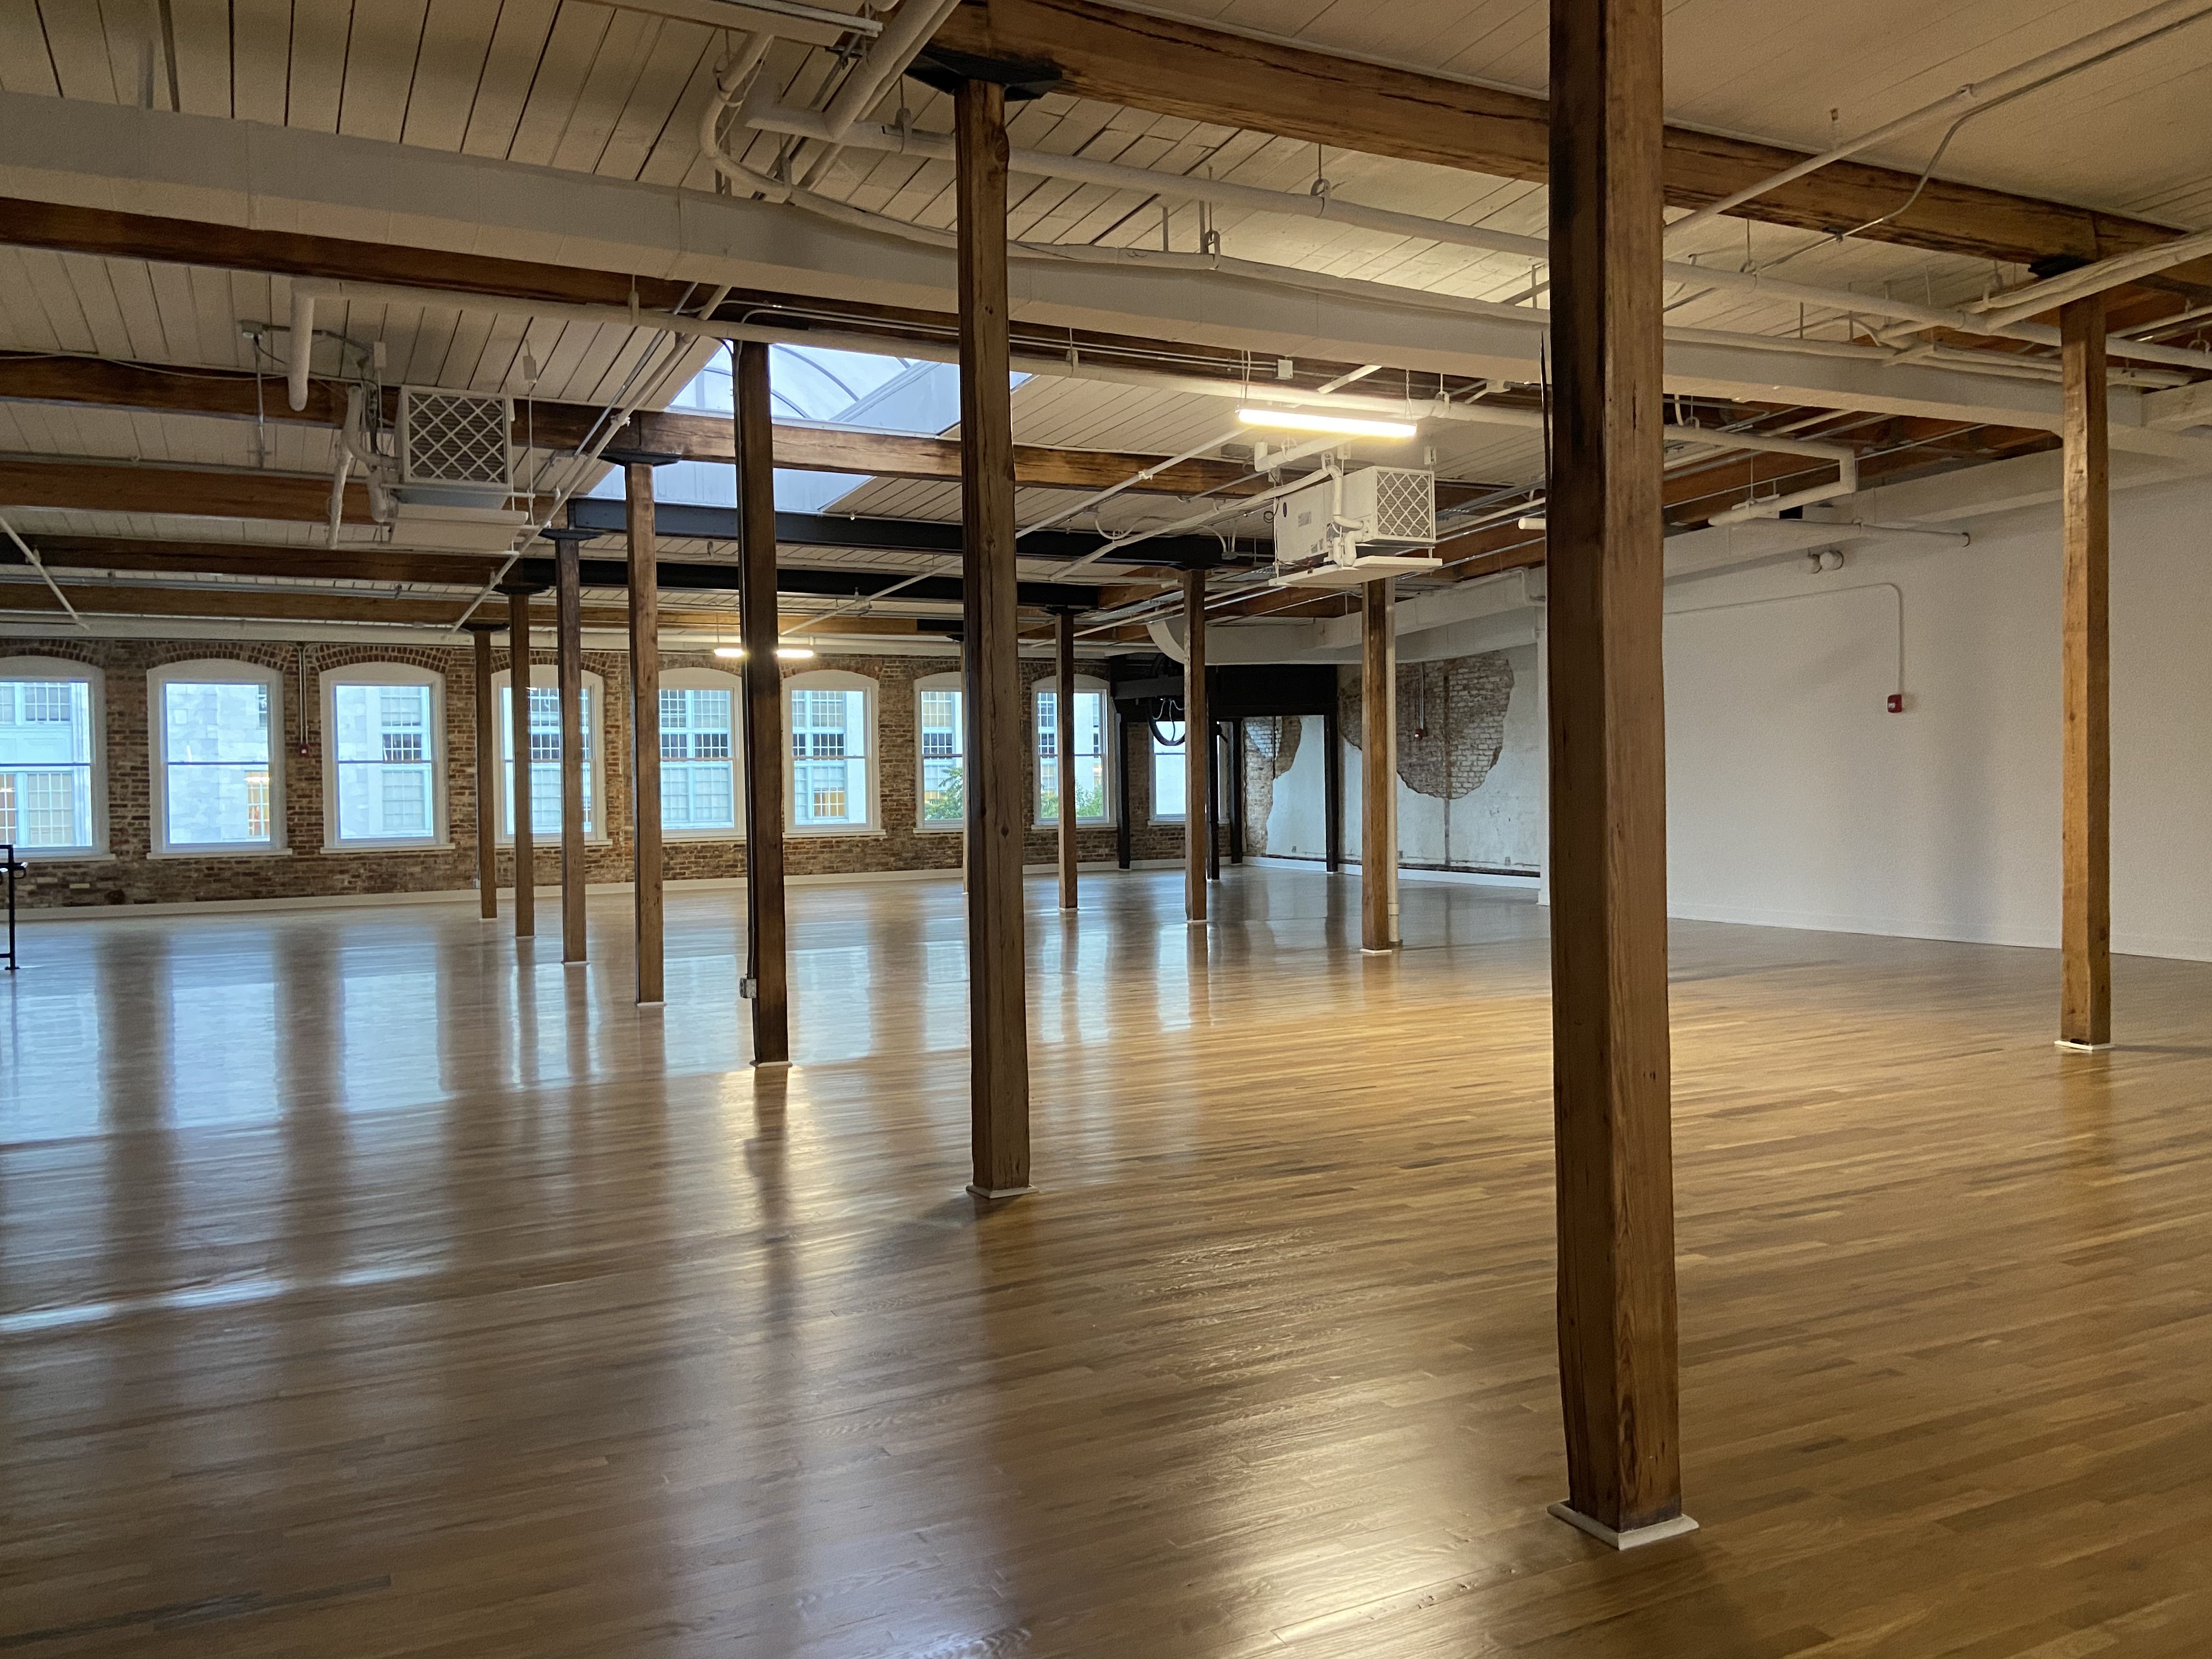 The interior of a extra-large open-floor office space with hardwood floors, illuminated by a skylight 